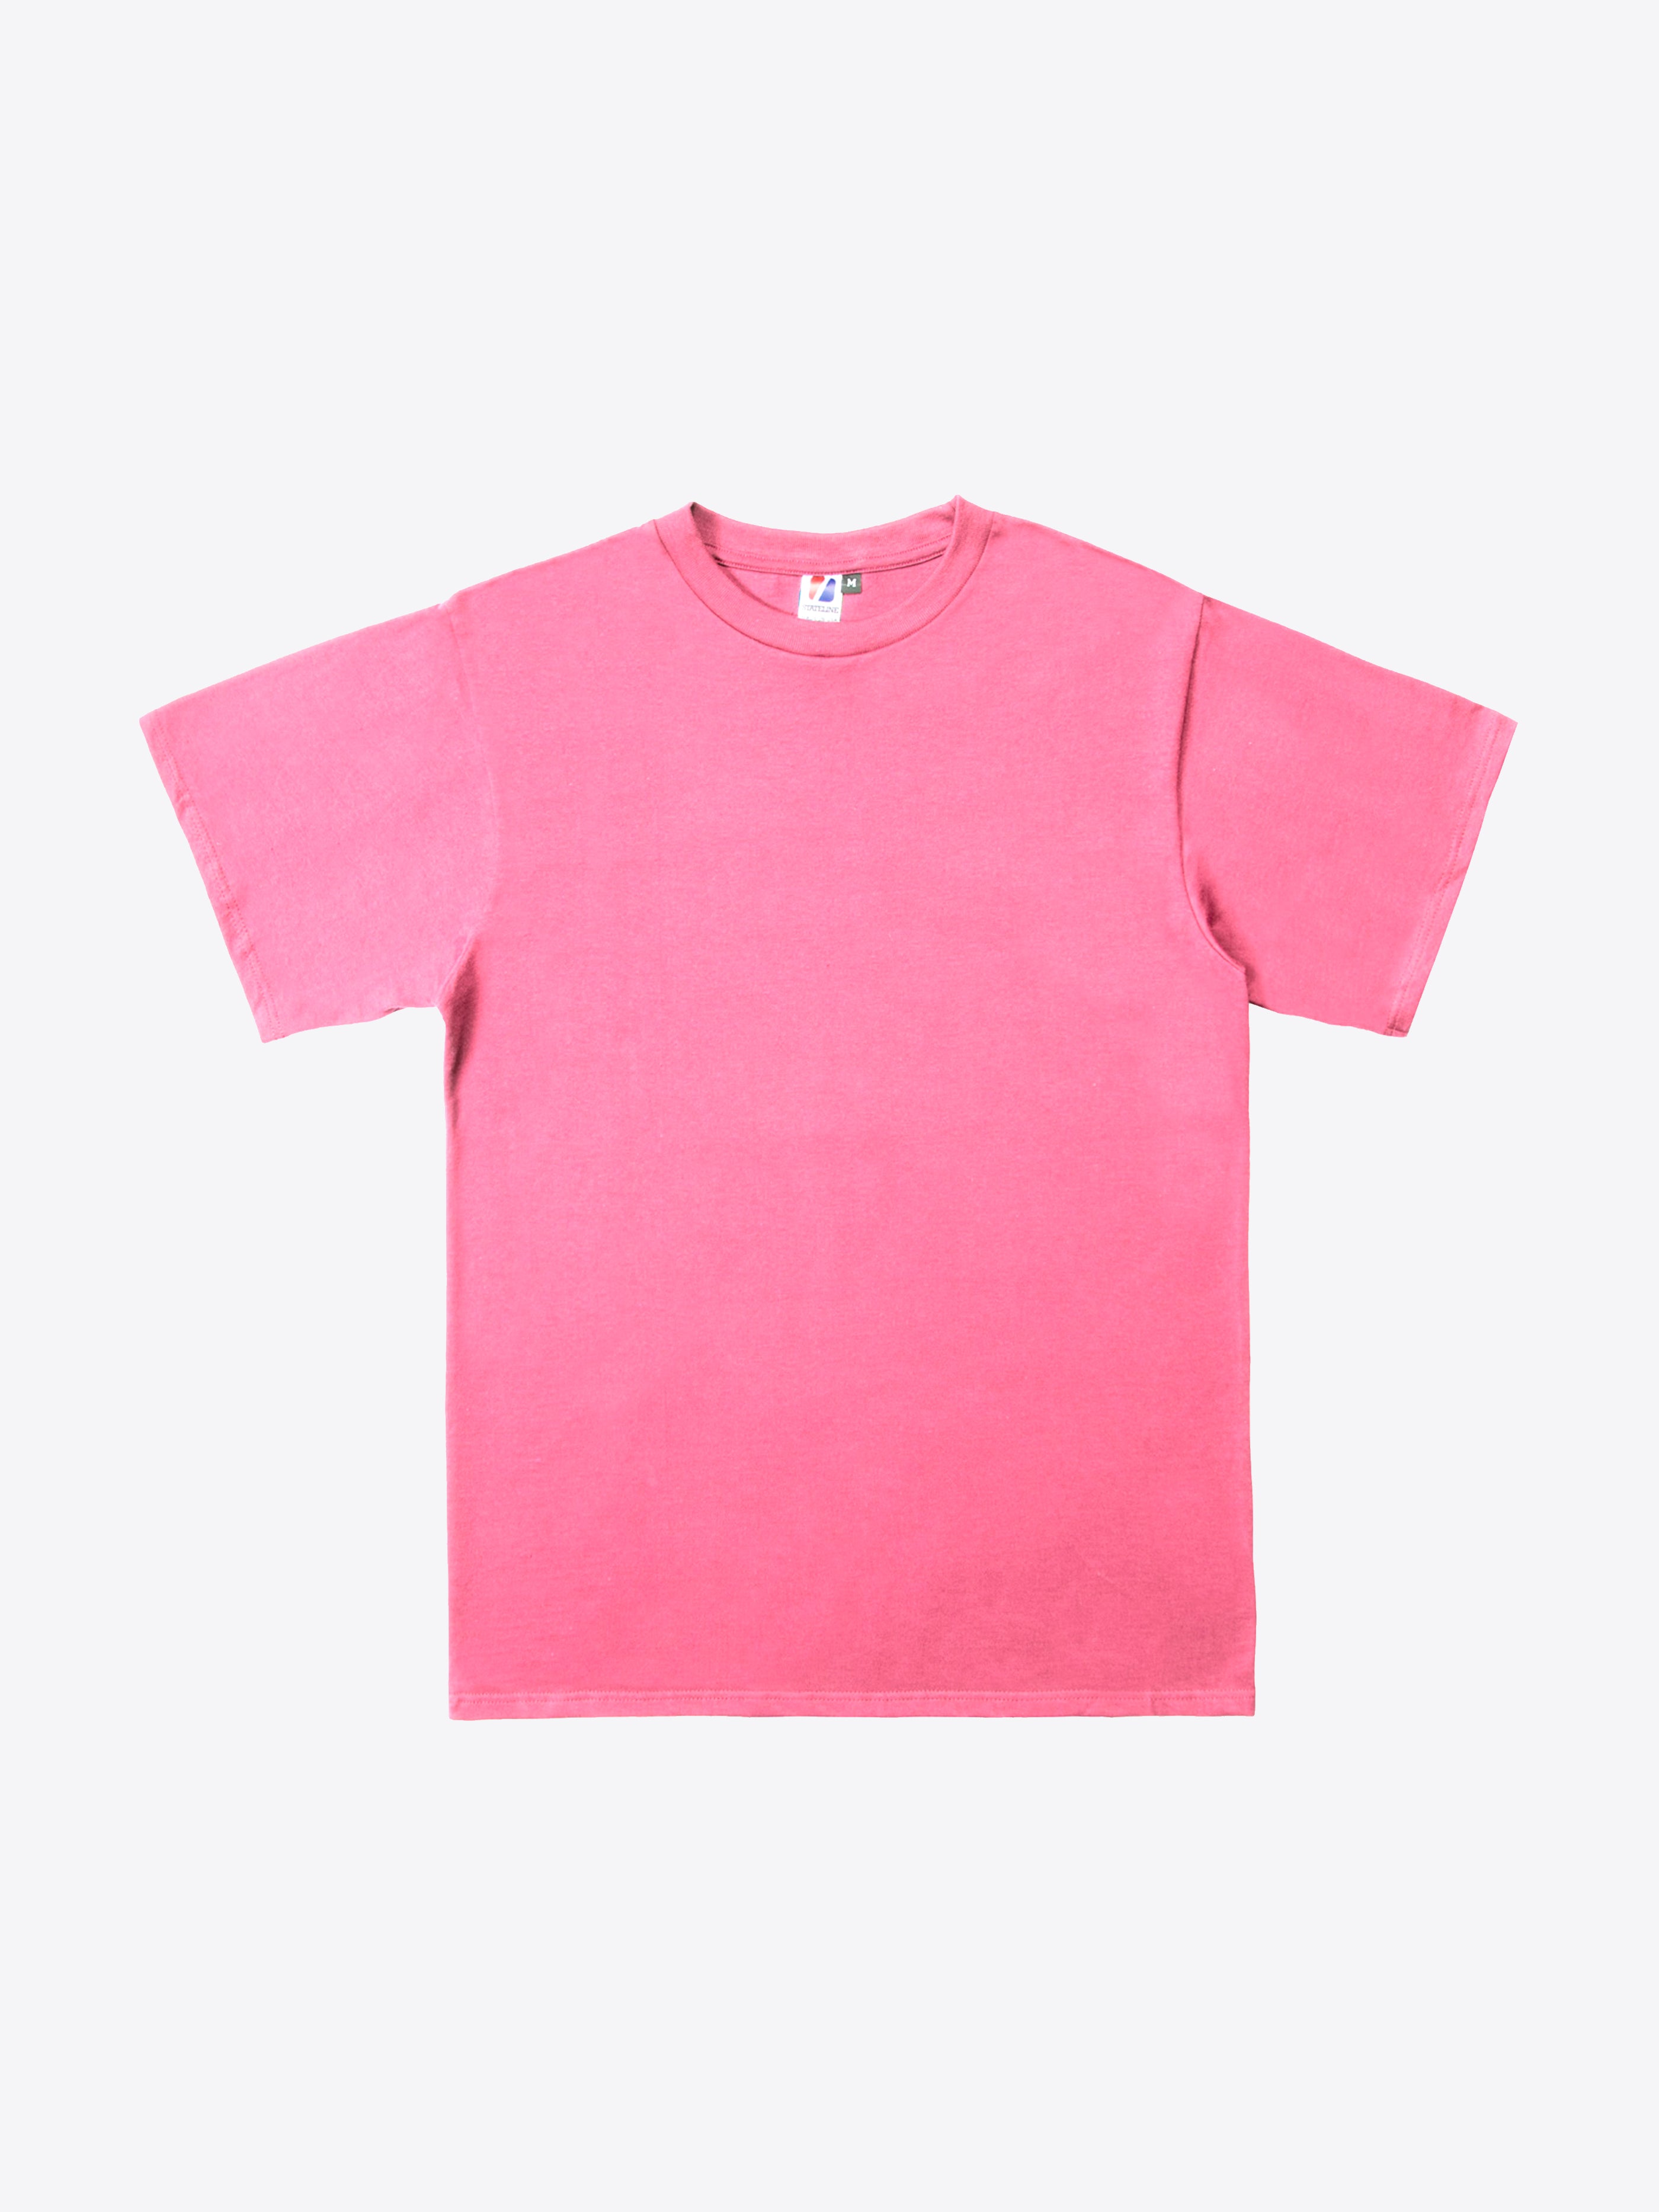 Jersey S/S Tee - Hot Pink